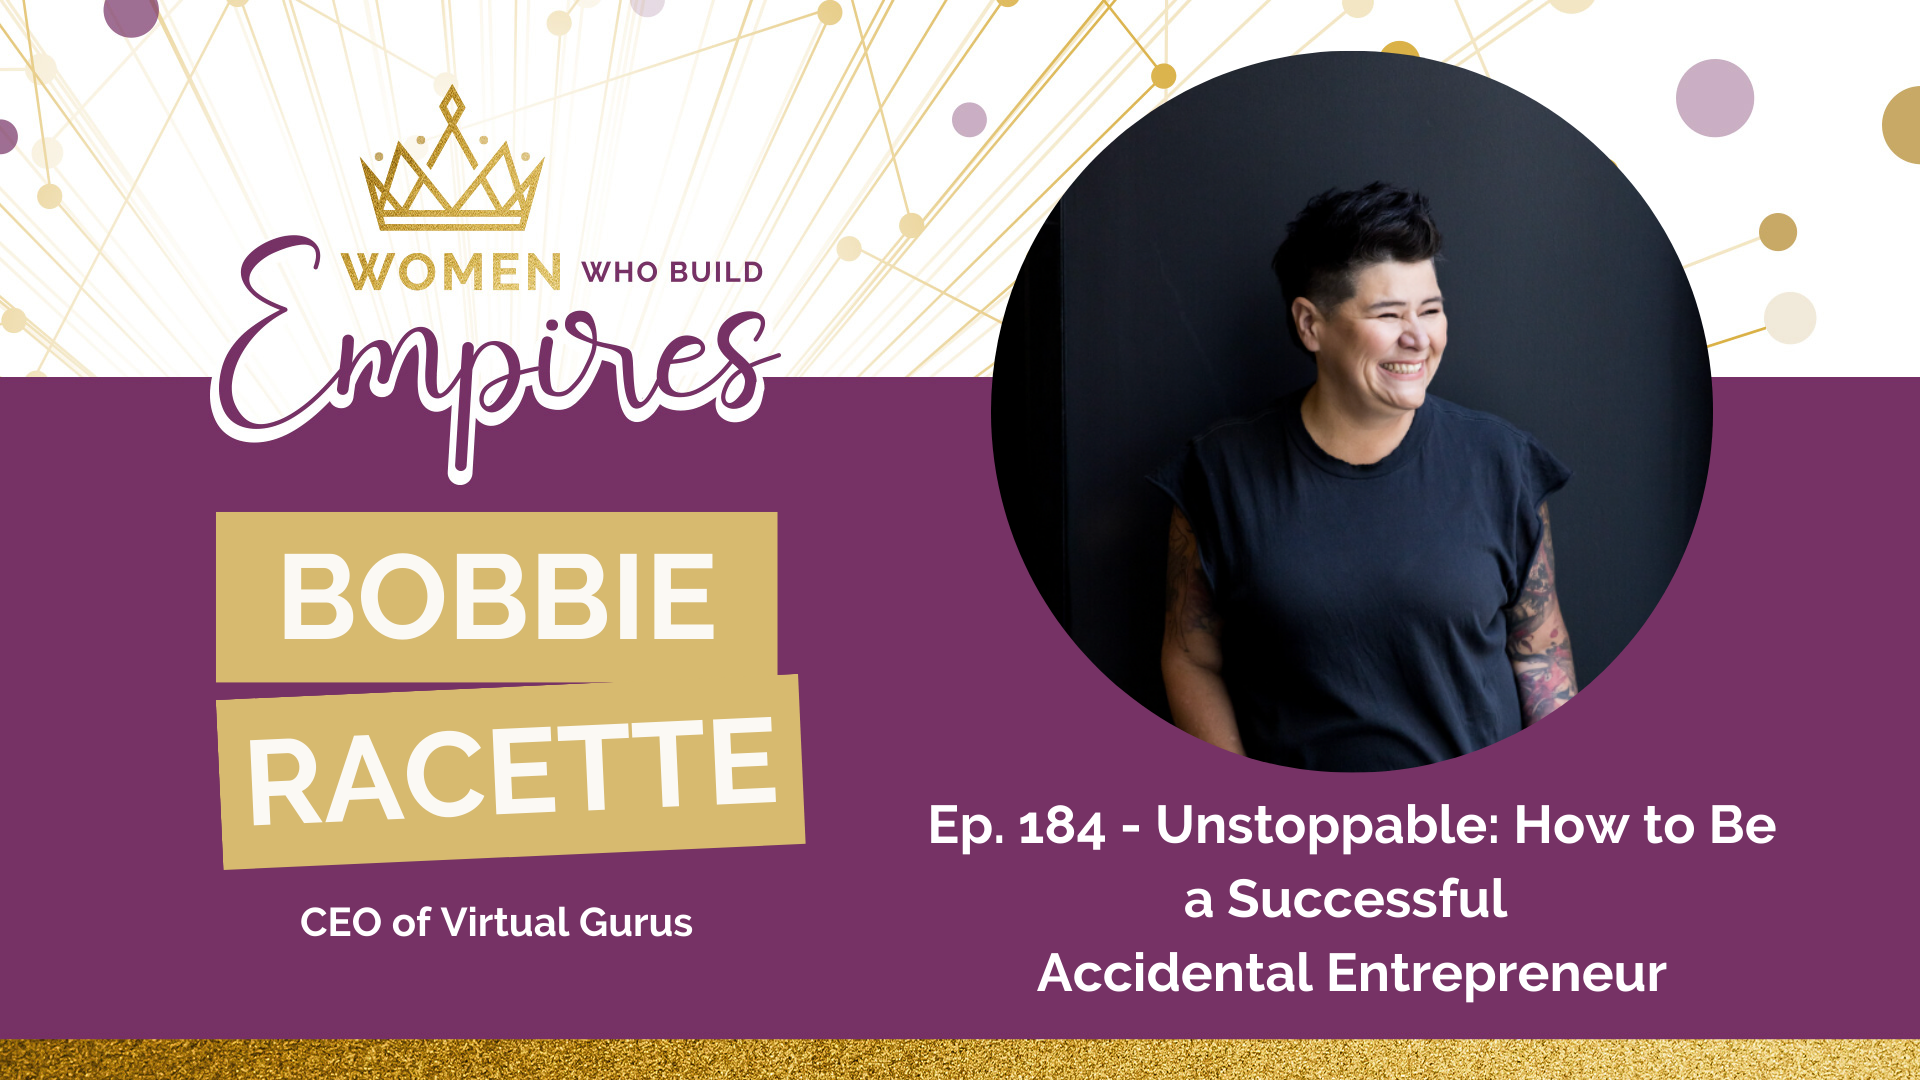 Ep. 184 Bobbie Racette: How to Be a Successful Accidental Entrepreneur